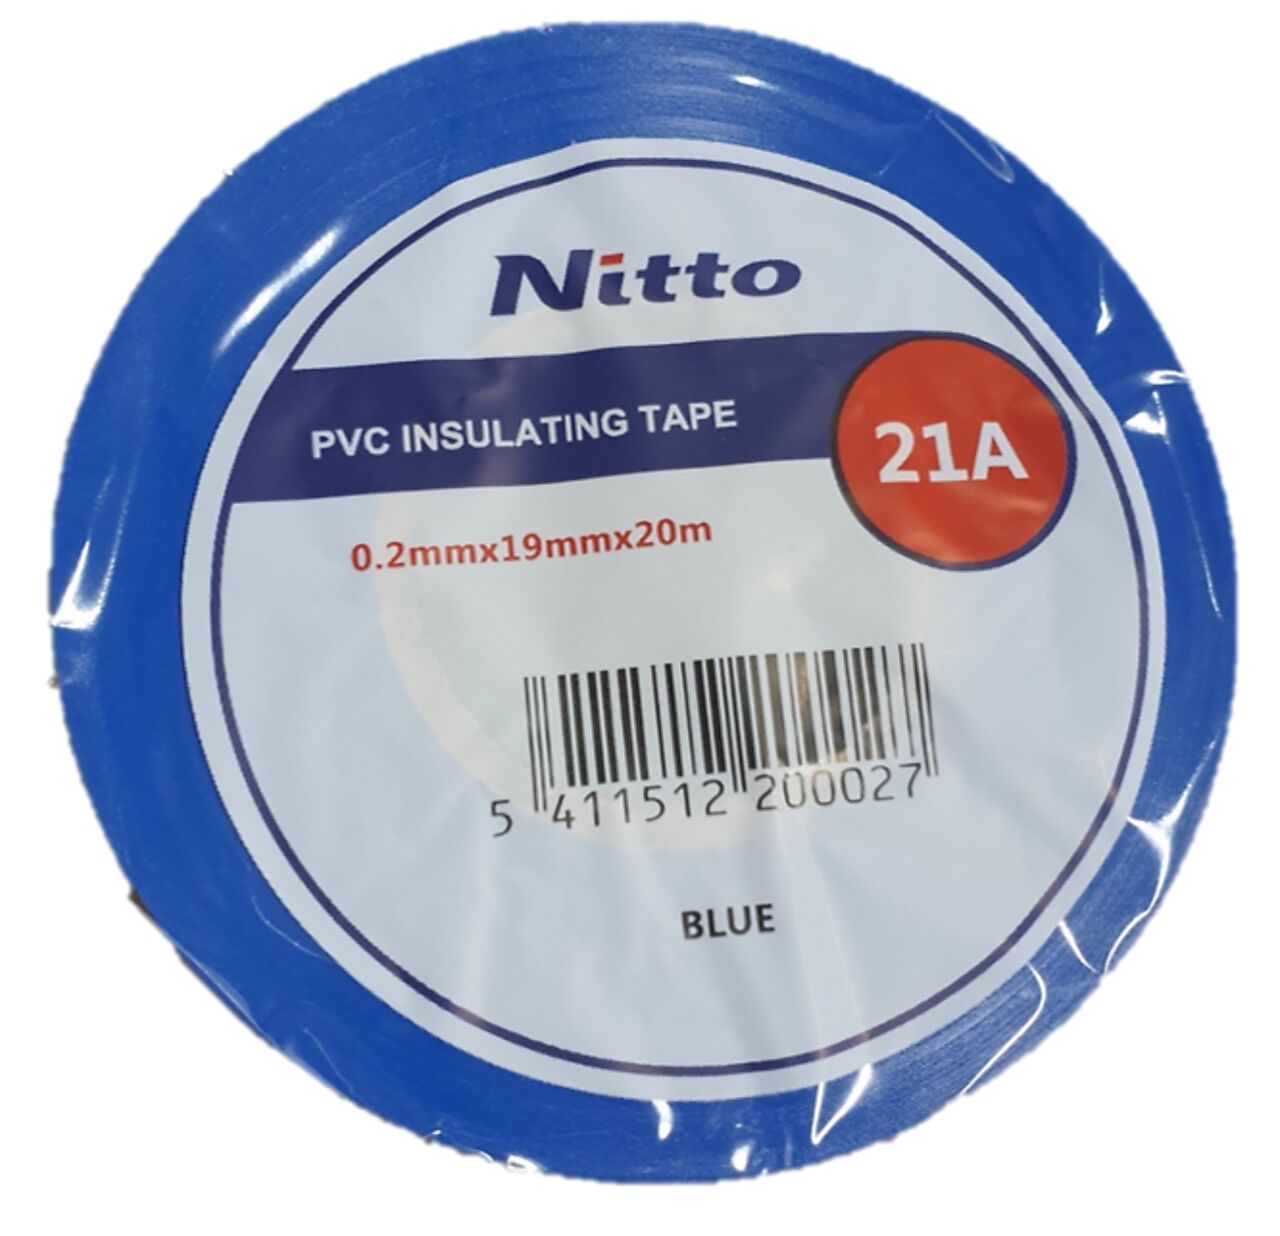 Neo-Select Nitto pvc-tape f/isolering, n21a 19mm x 20m blå 1